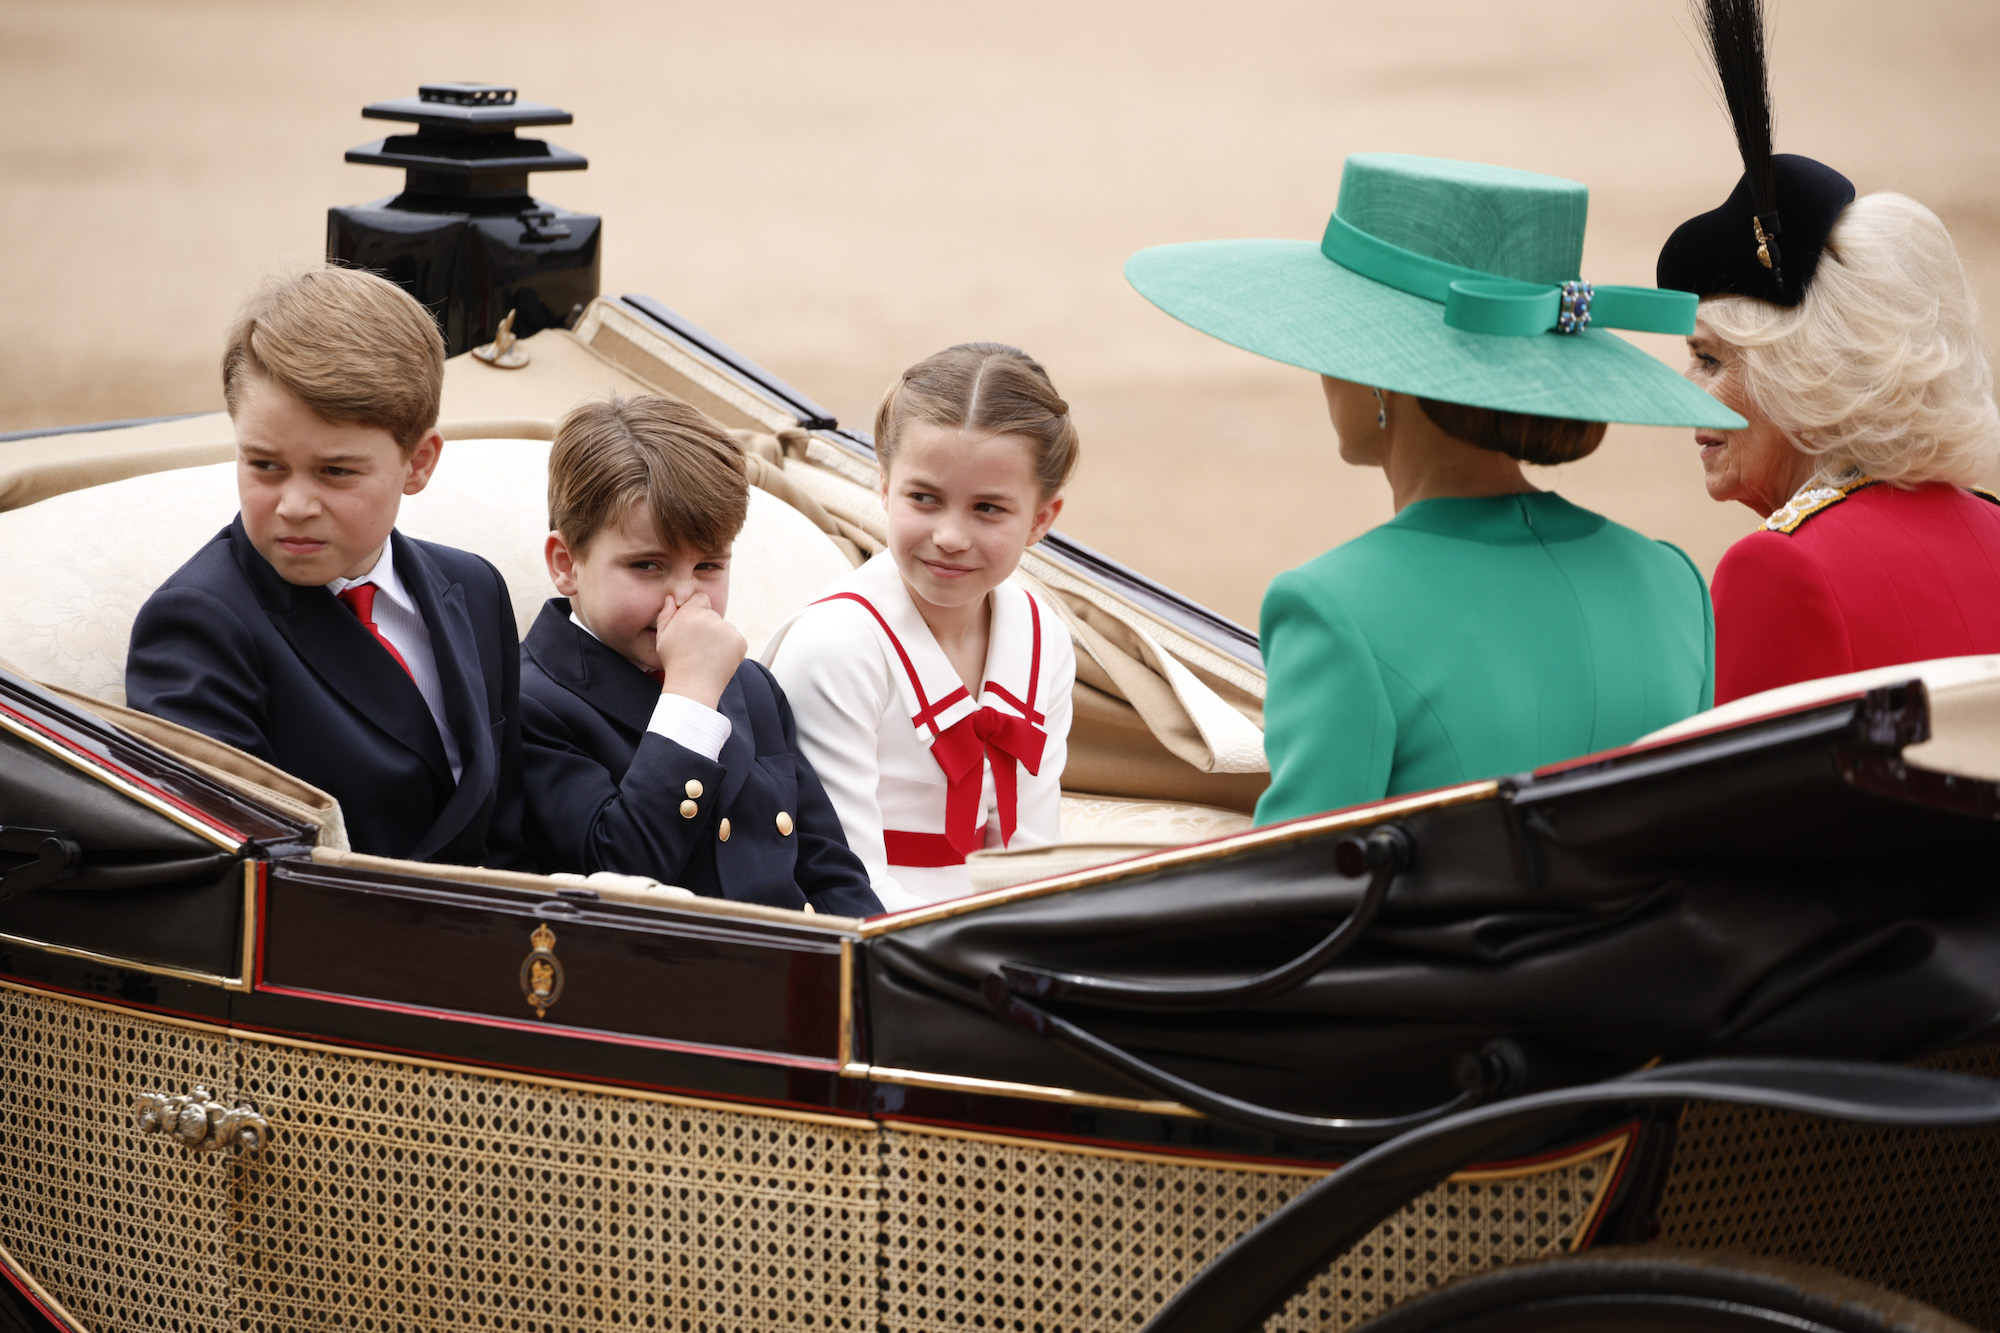 Prince-William-Kate-s-Kids-Steal-the-Show-at-Trooping-the-Colour-7.jpg